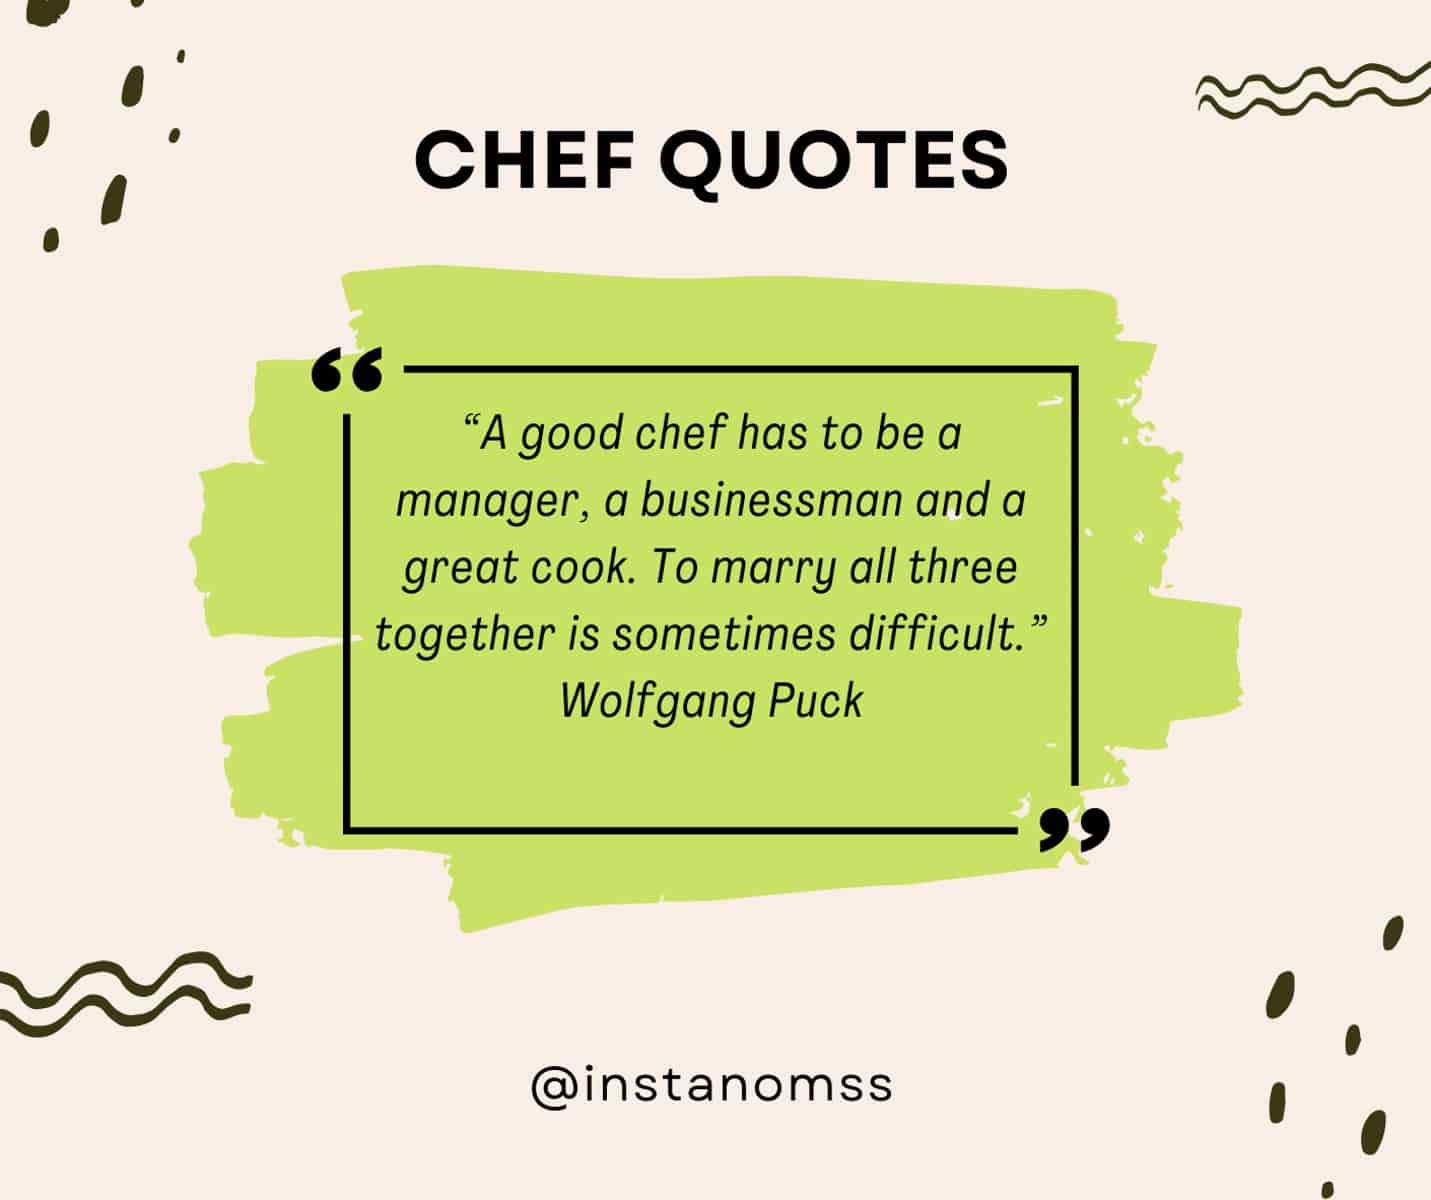 “A good chef has to be a manager, a businessman and a great cook. To marry all three together is sometimes difficult.” Wolfgang Puck